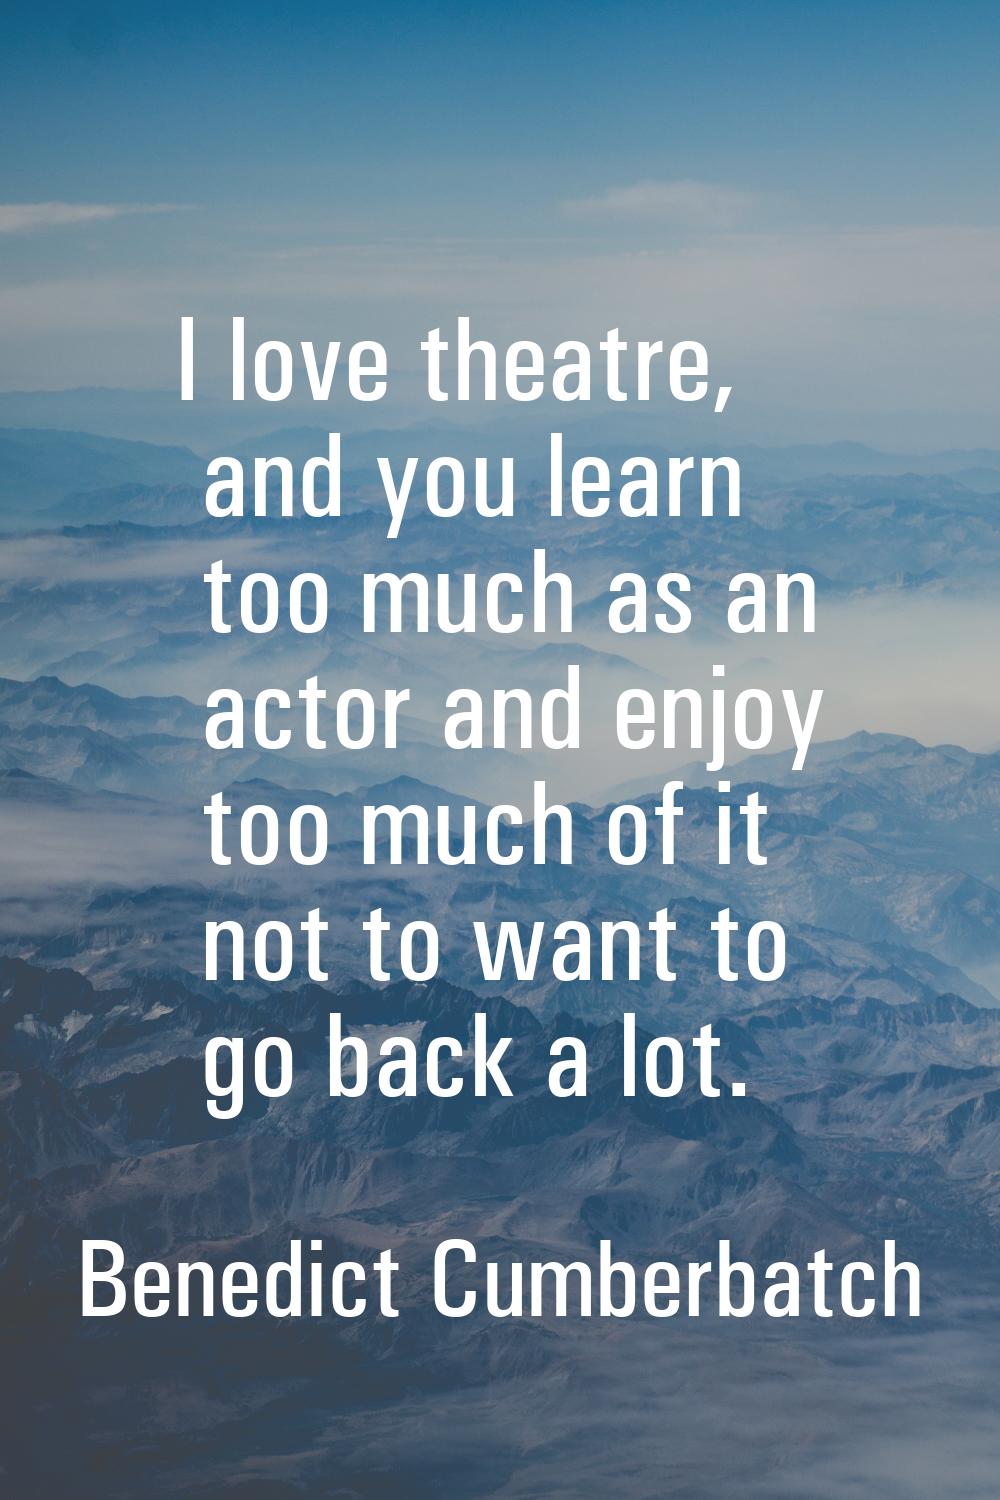 I love theatre, and you learn too much as an actor and enjoy too much of it not to want to go back 